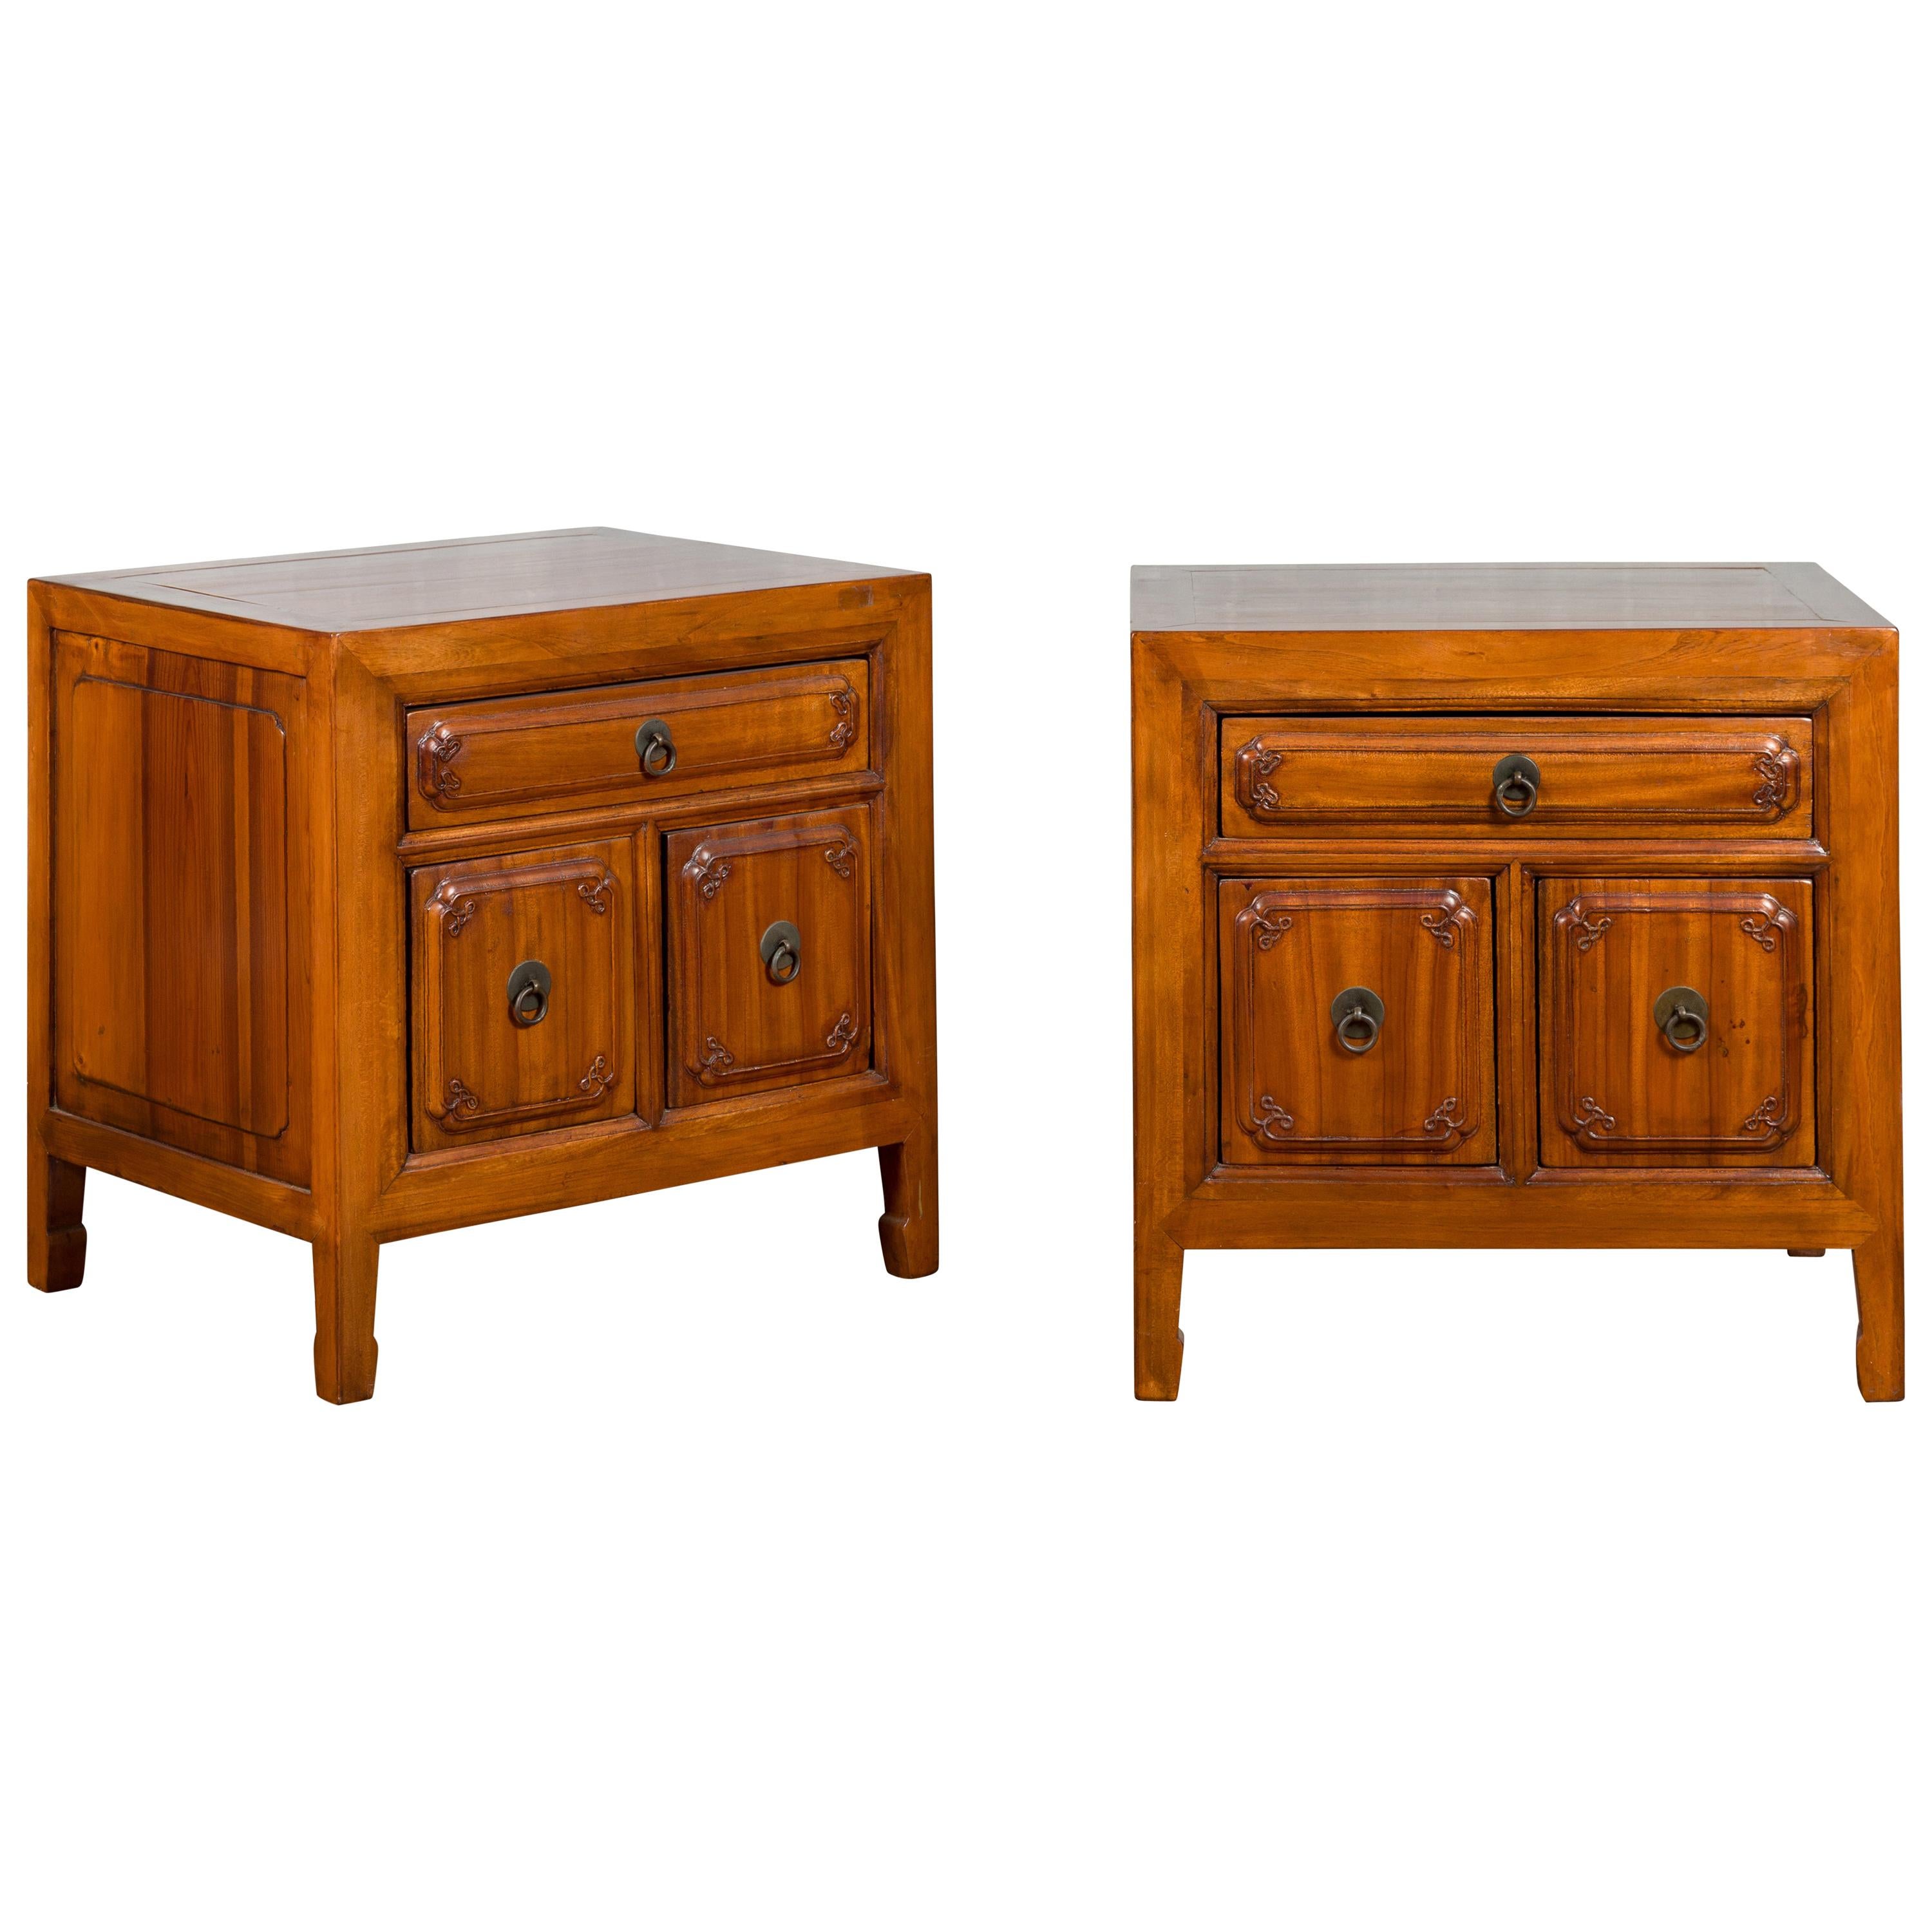 Pair of Chinese Qing Dynasty Period Natural Elm Low Cabinets with Three Drawers